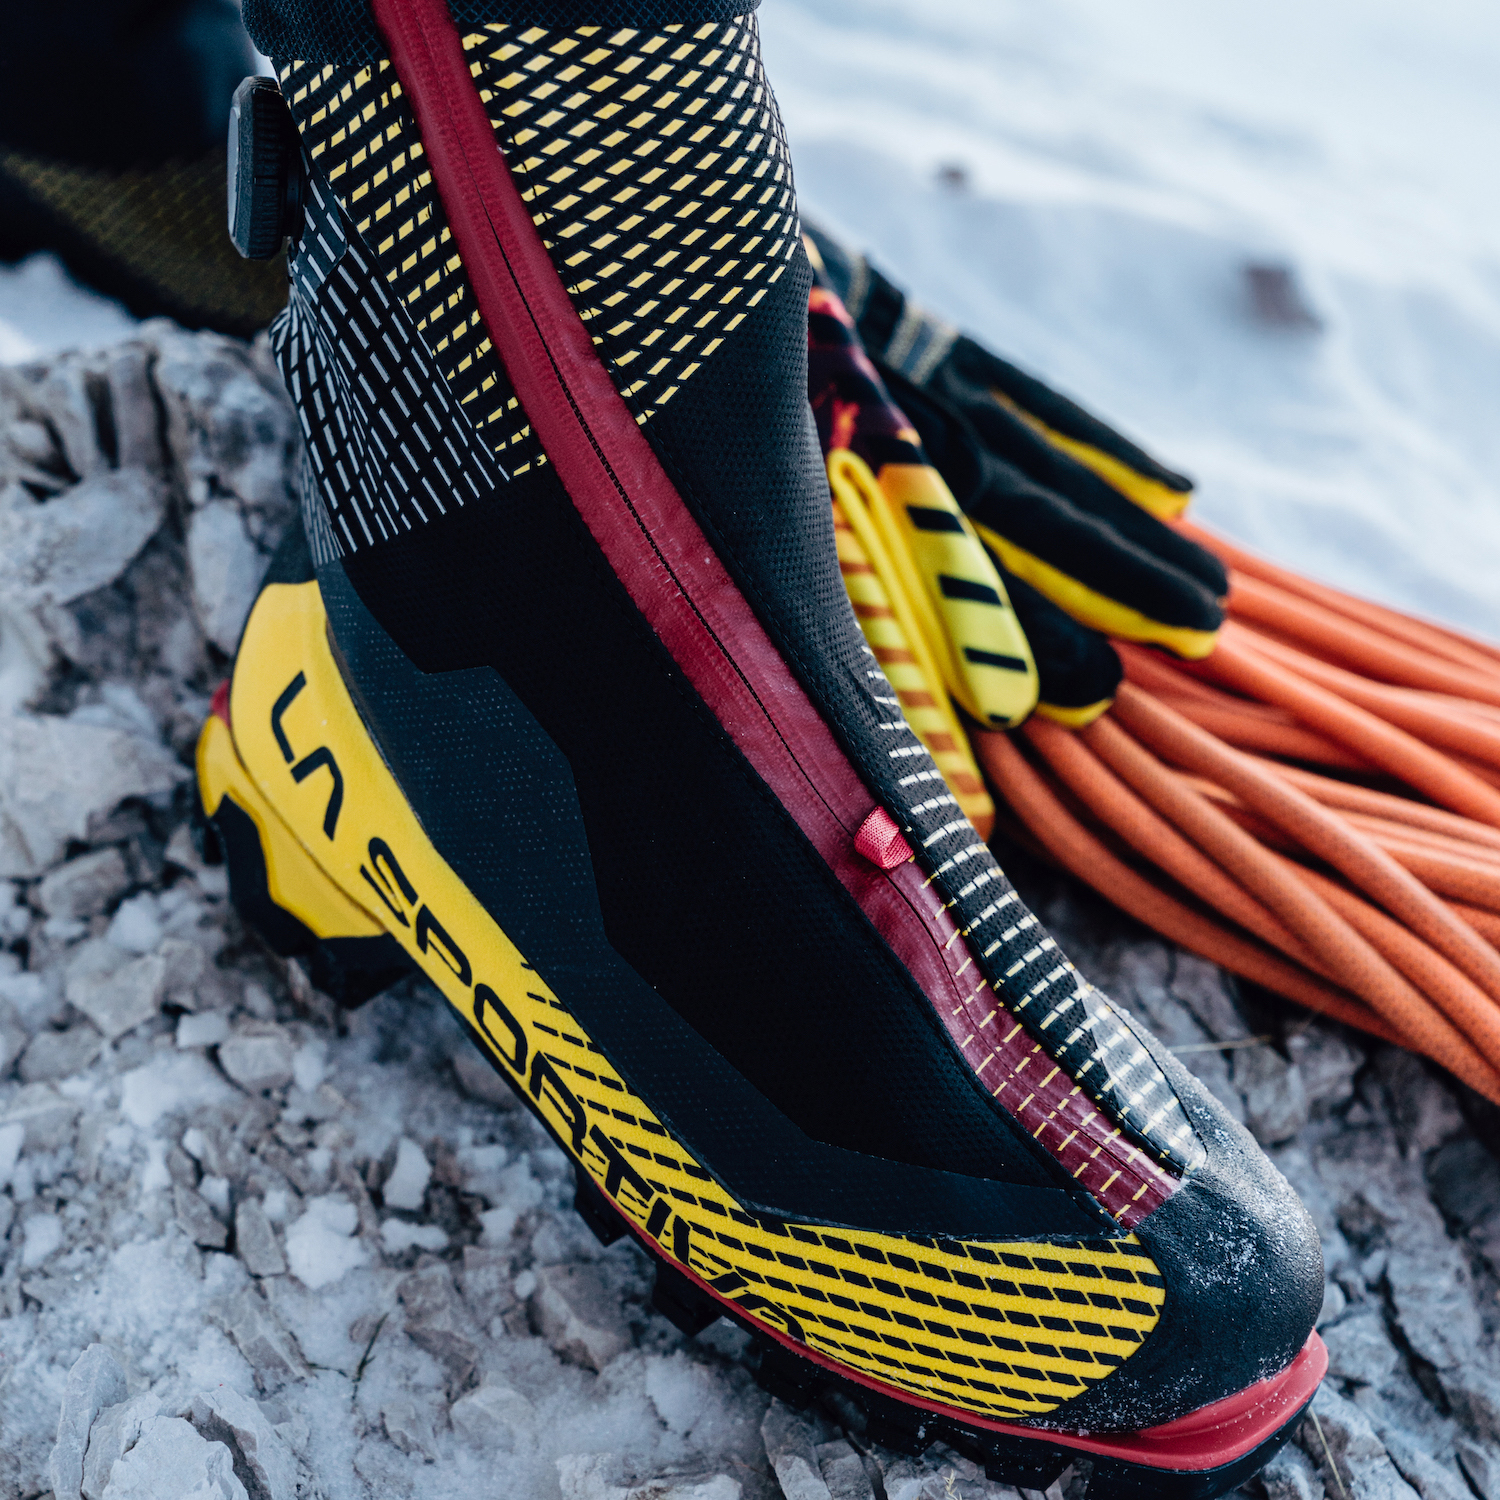 La Sportiva presents shoe innovations at OutDoor by ISPO